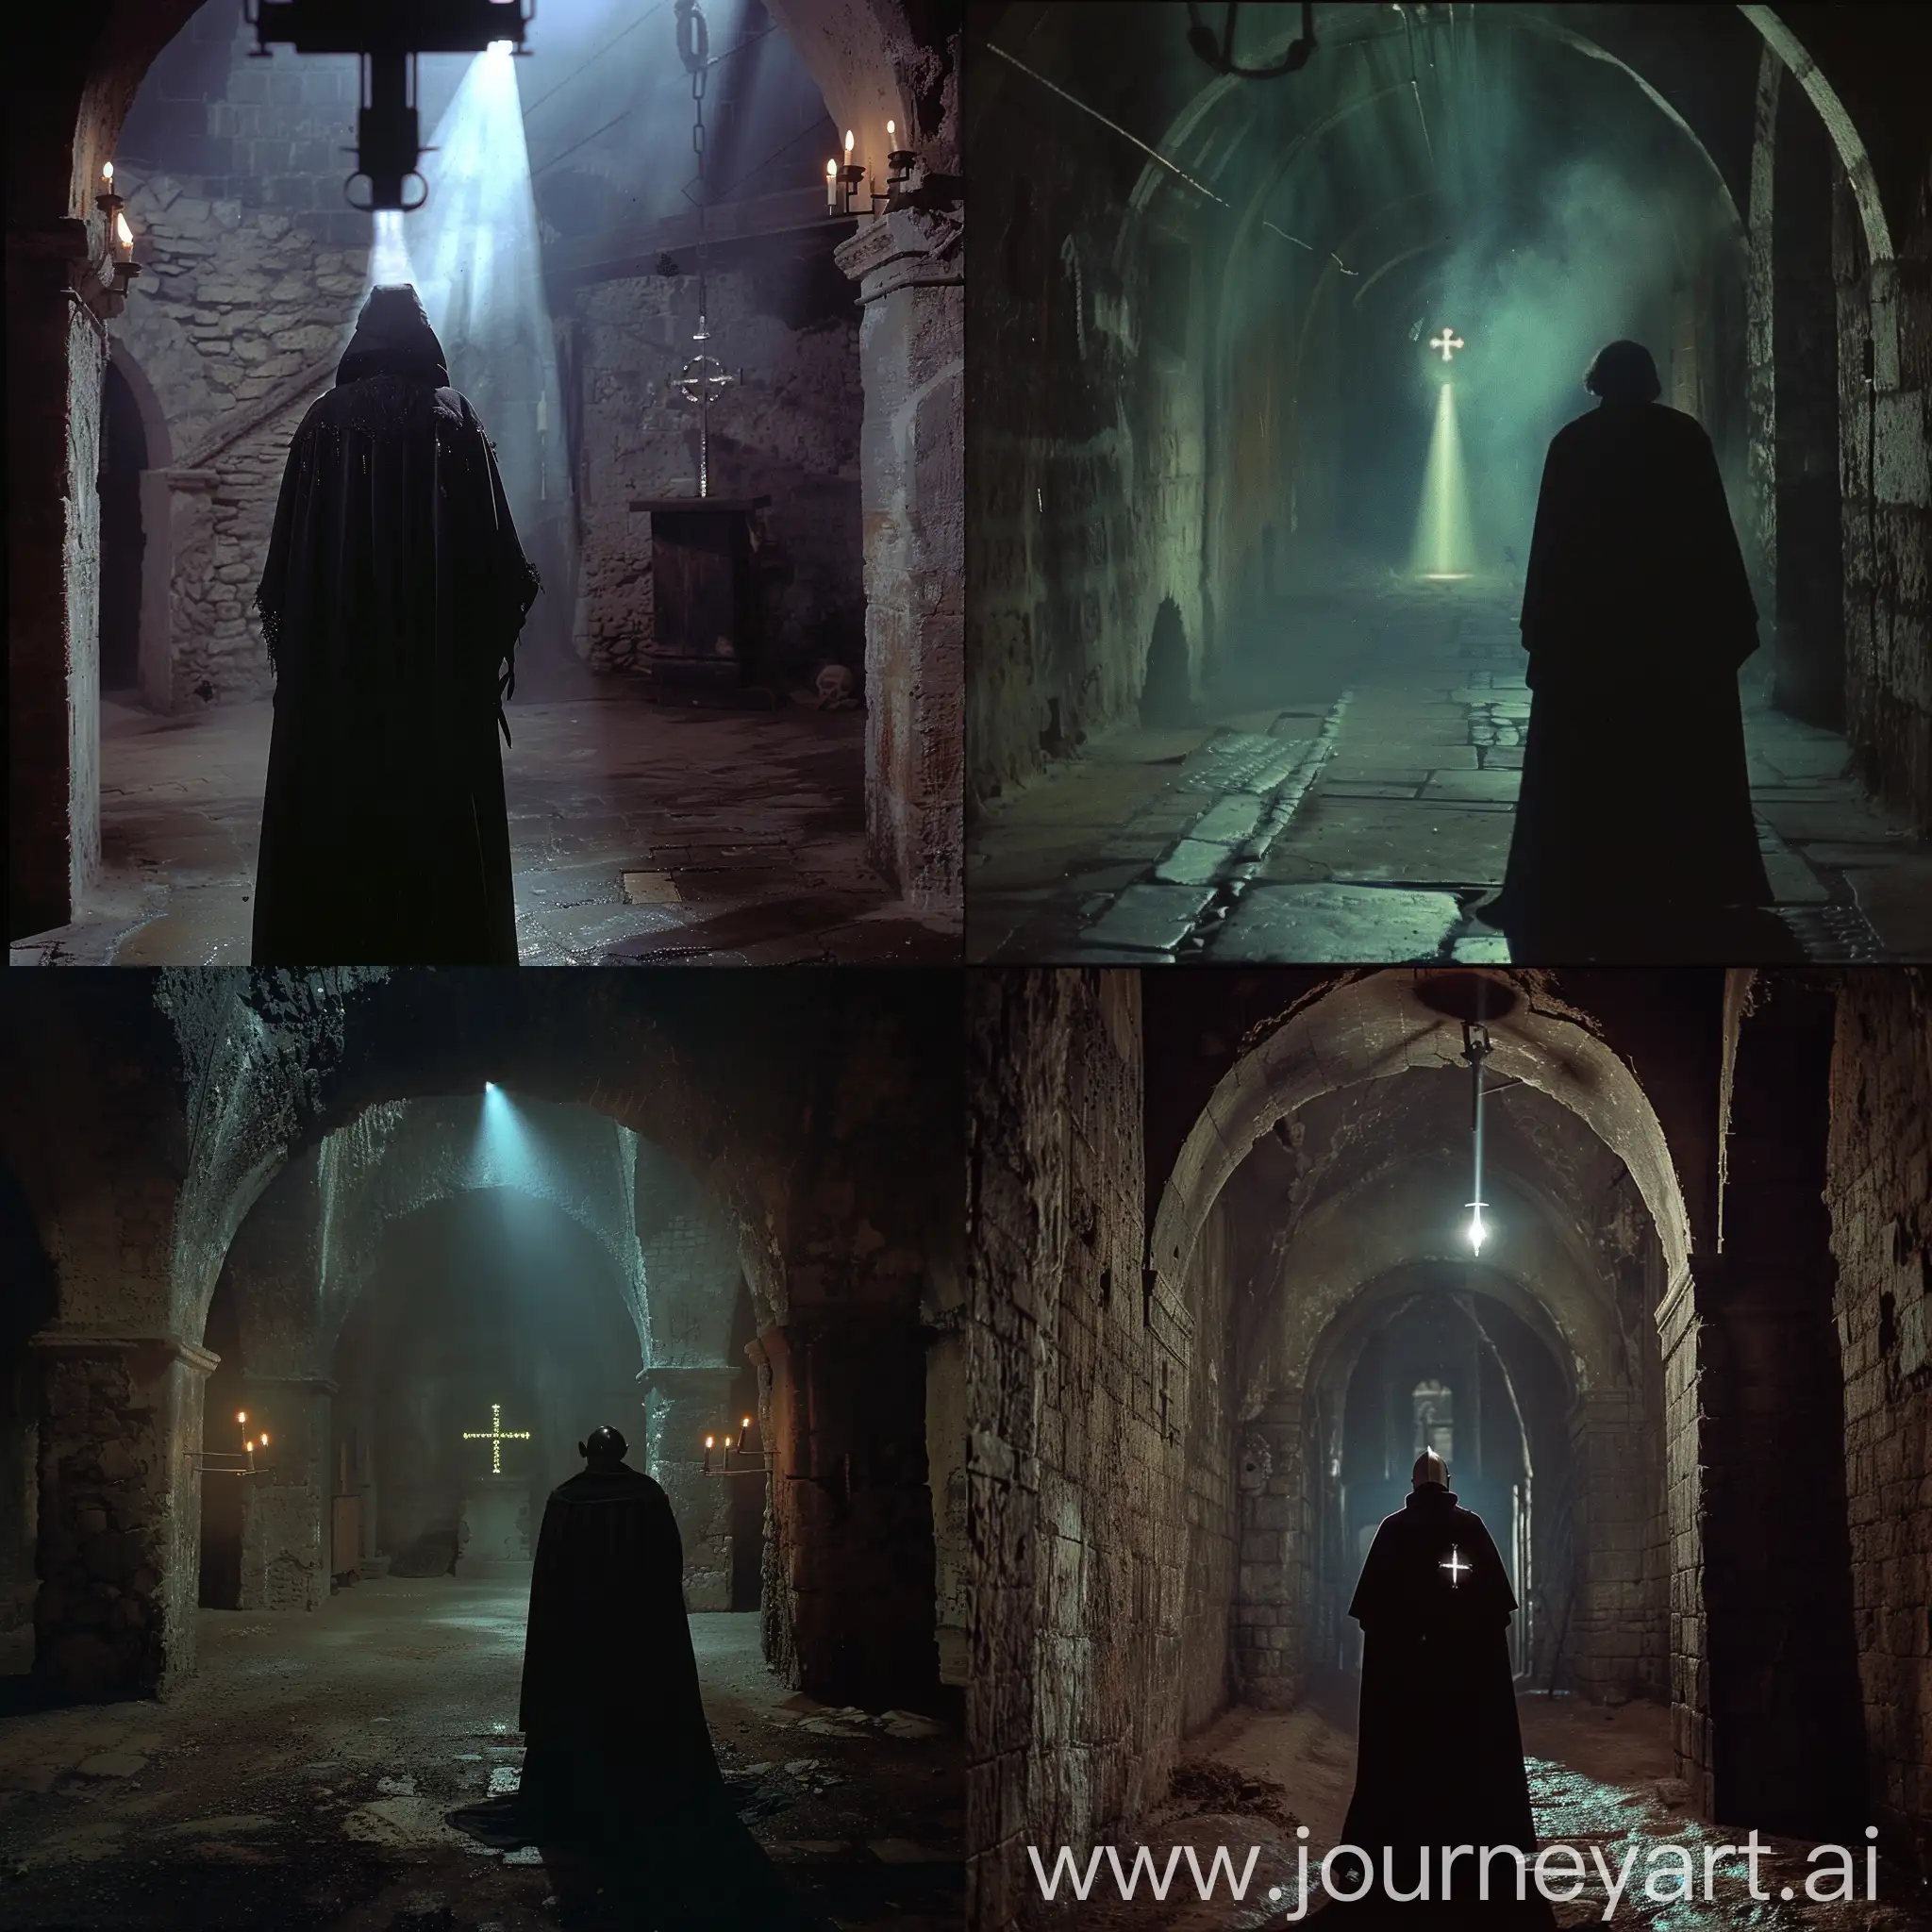 DVD screengrabs Inquisitor in a black cassock with a cross, behind which magic light stands in the middle of the dungeon as dark fantasy 1980